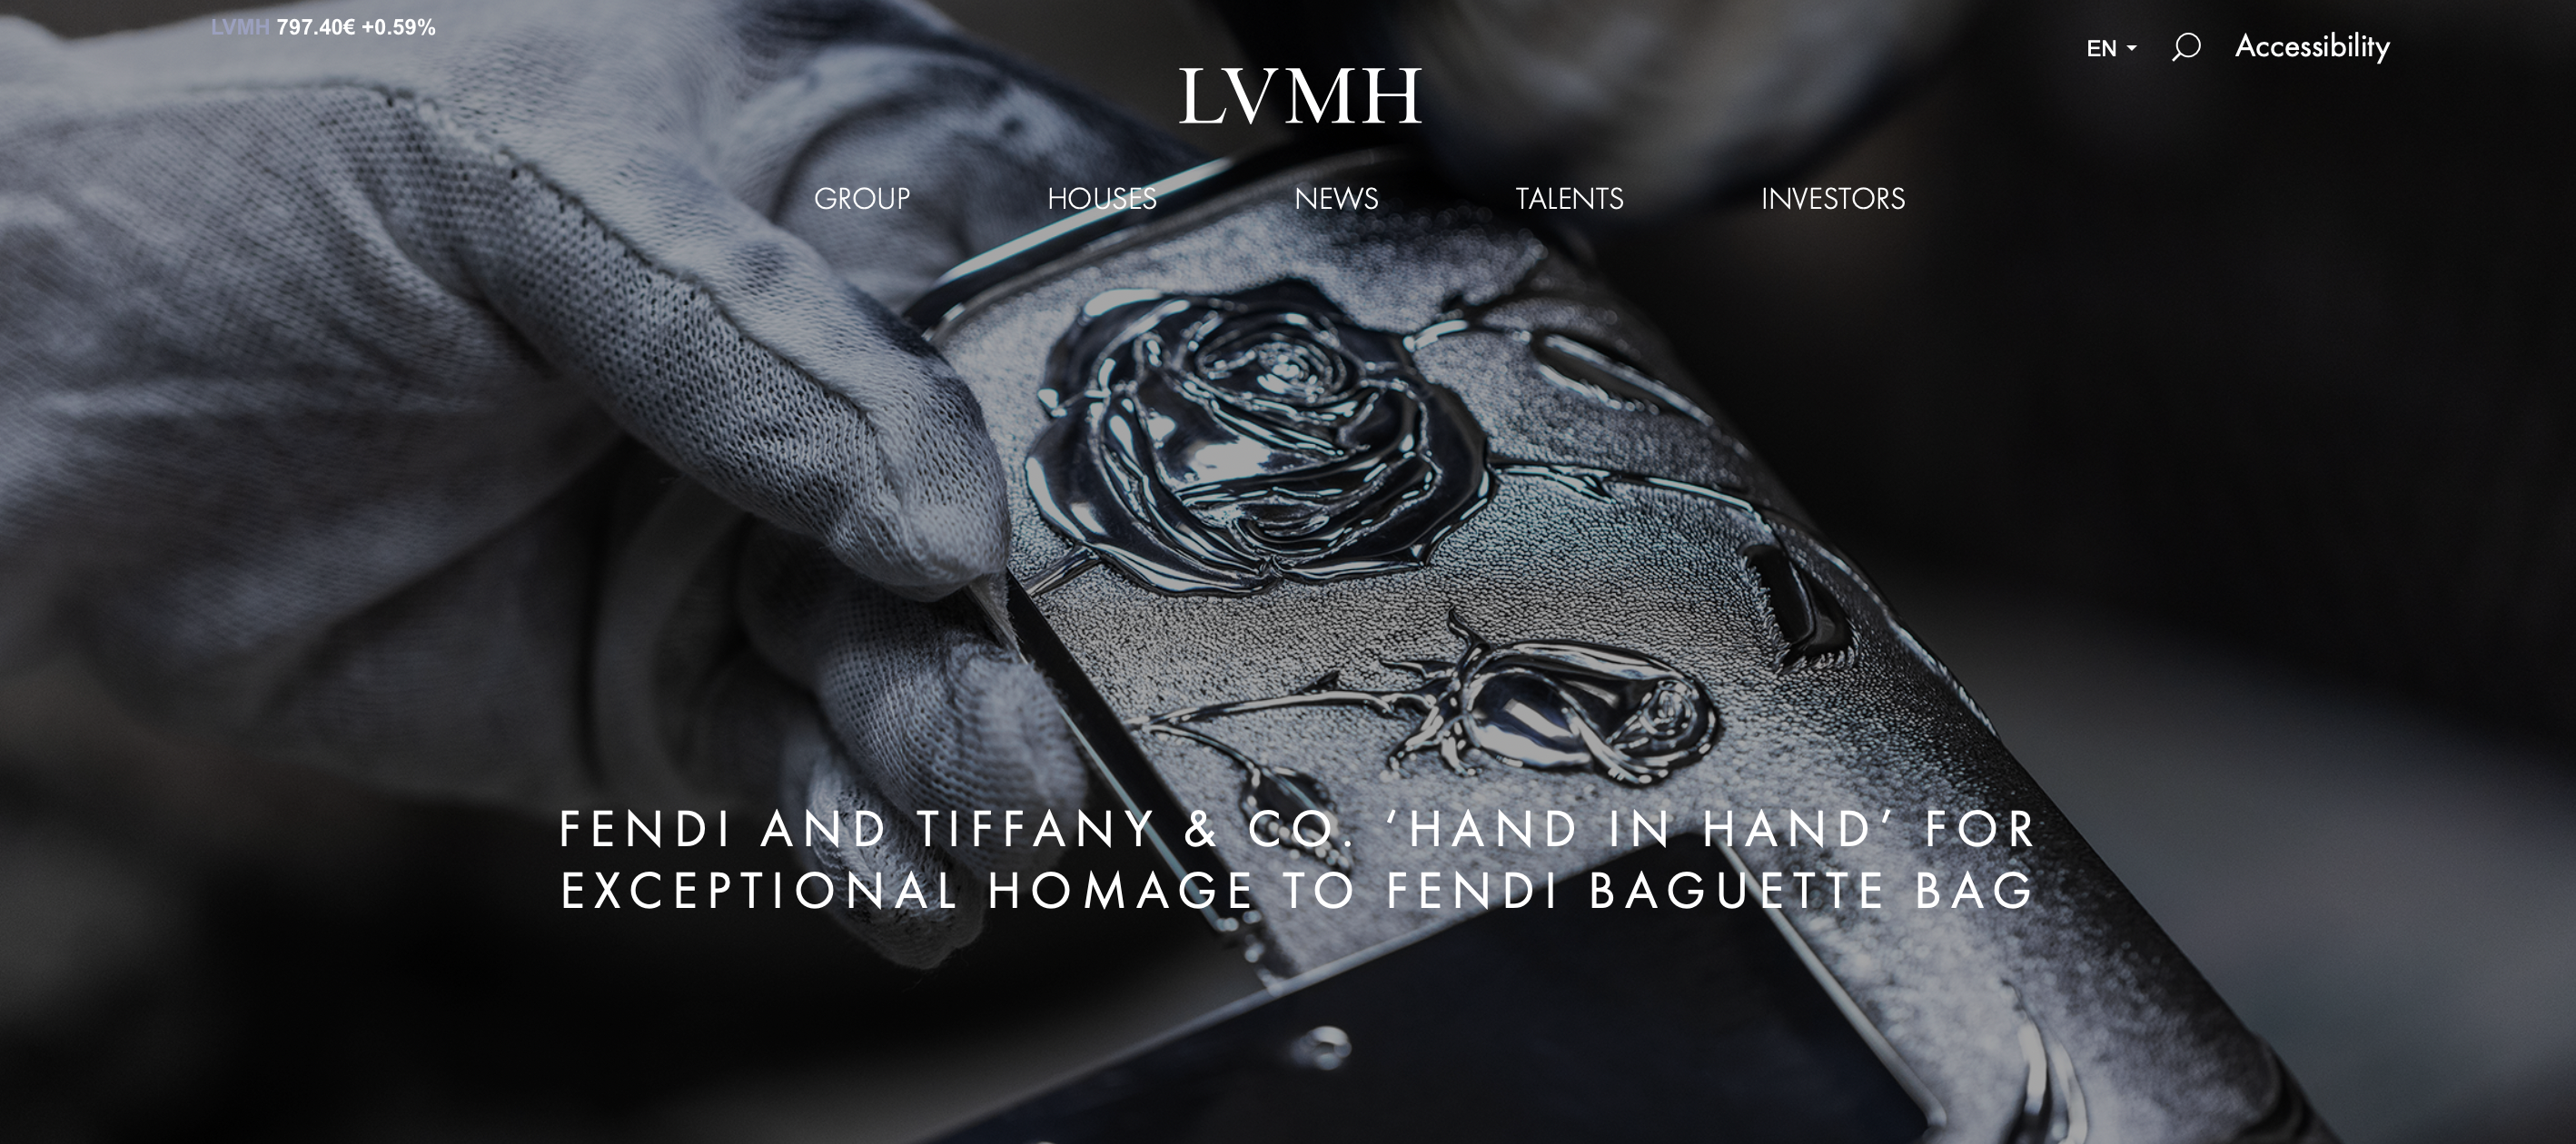 LVMH Group’s Shares Price Hits Record High, Market Value Reaches 400 Billion euros for the First Time